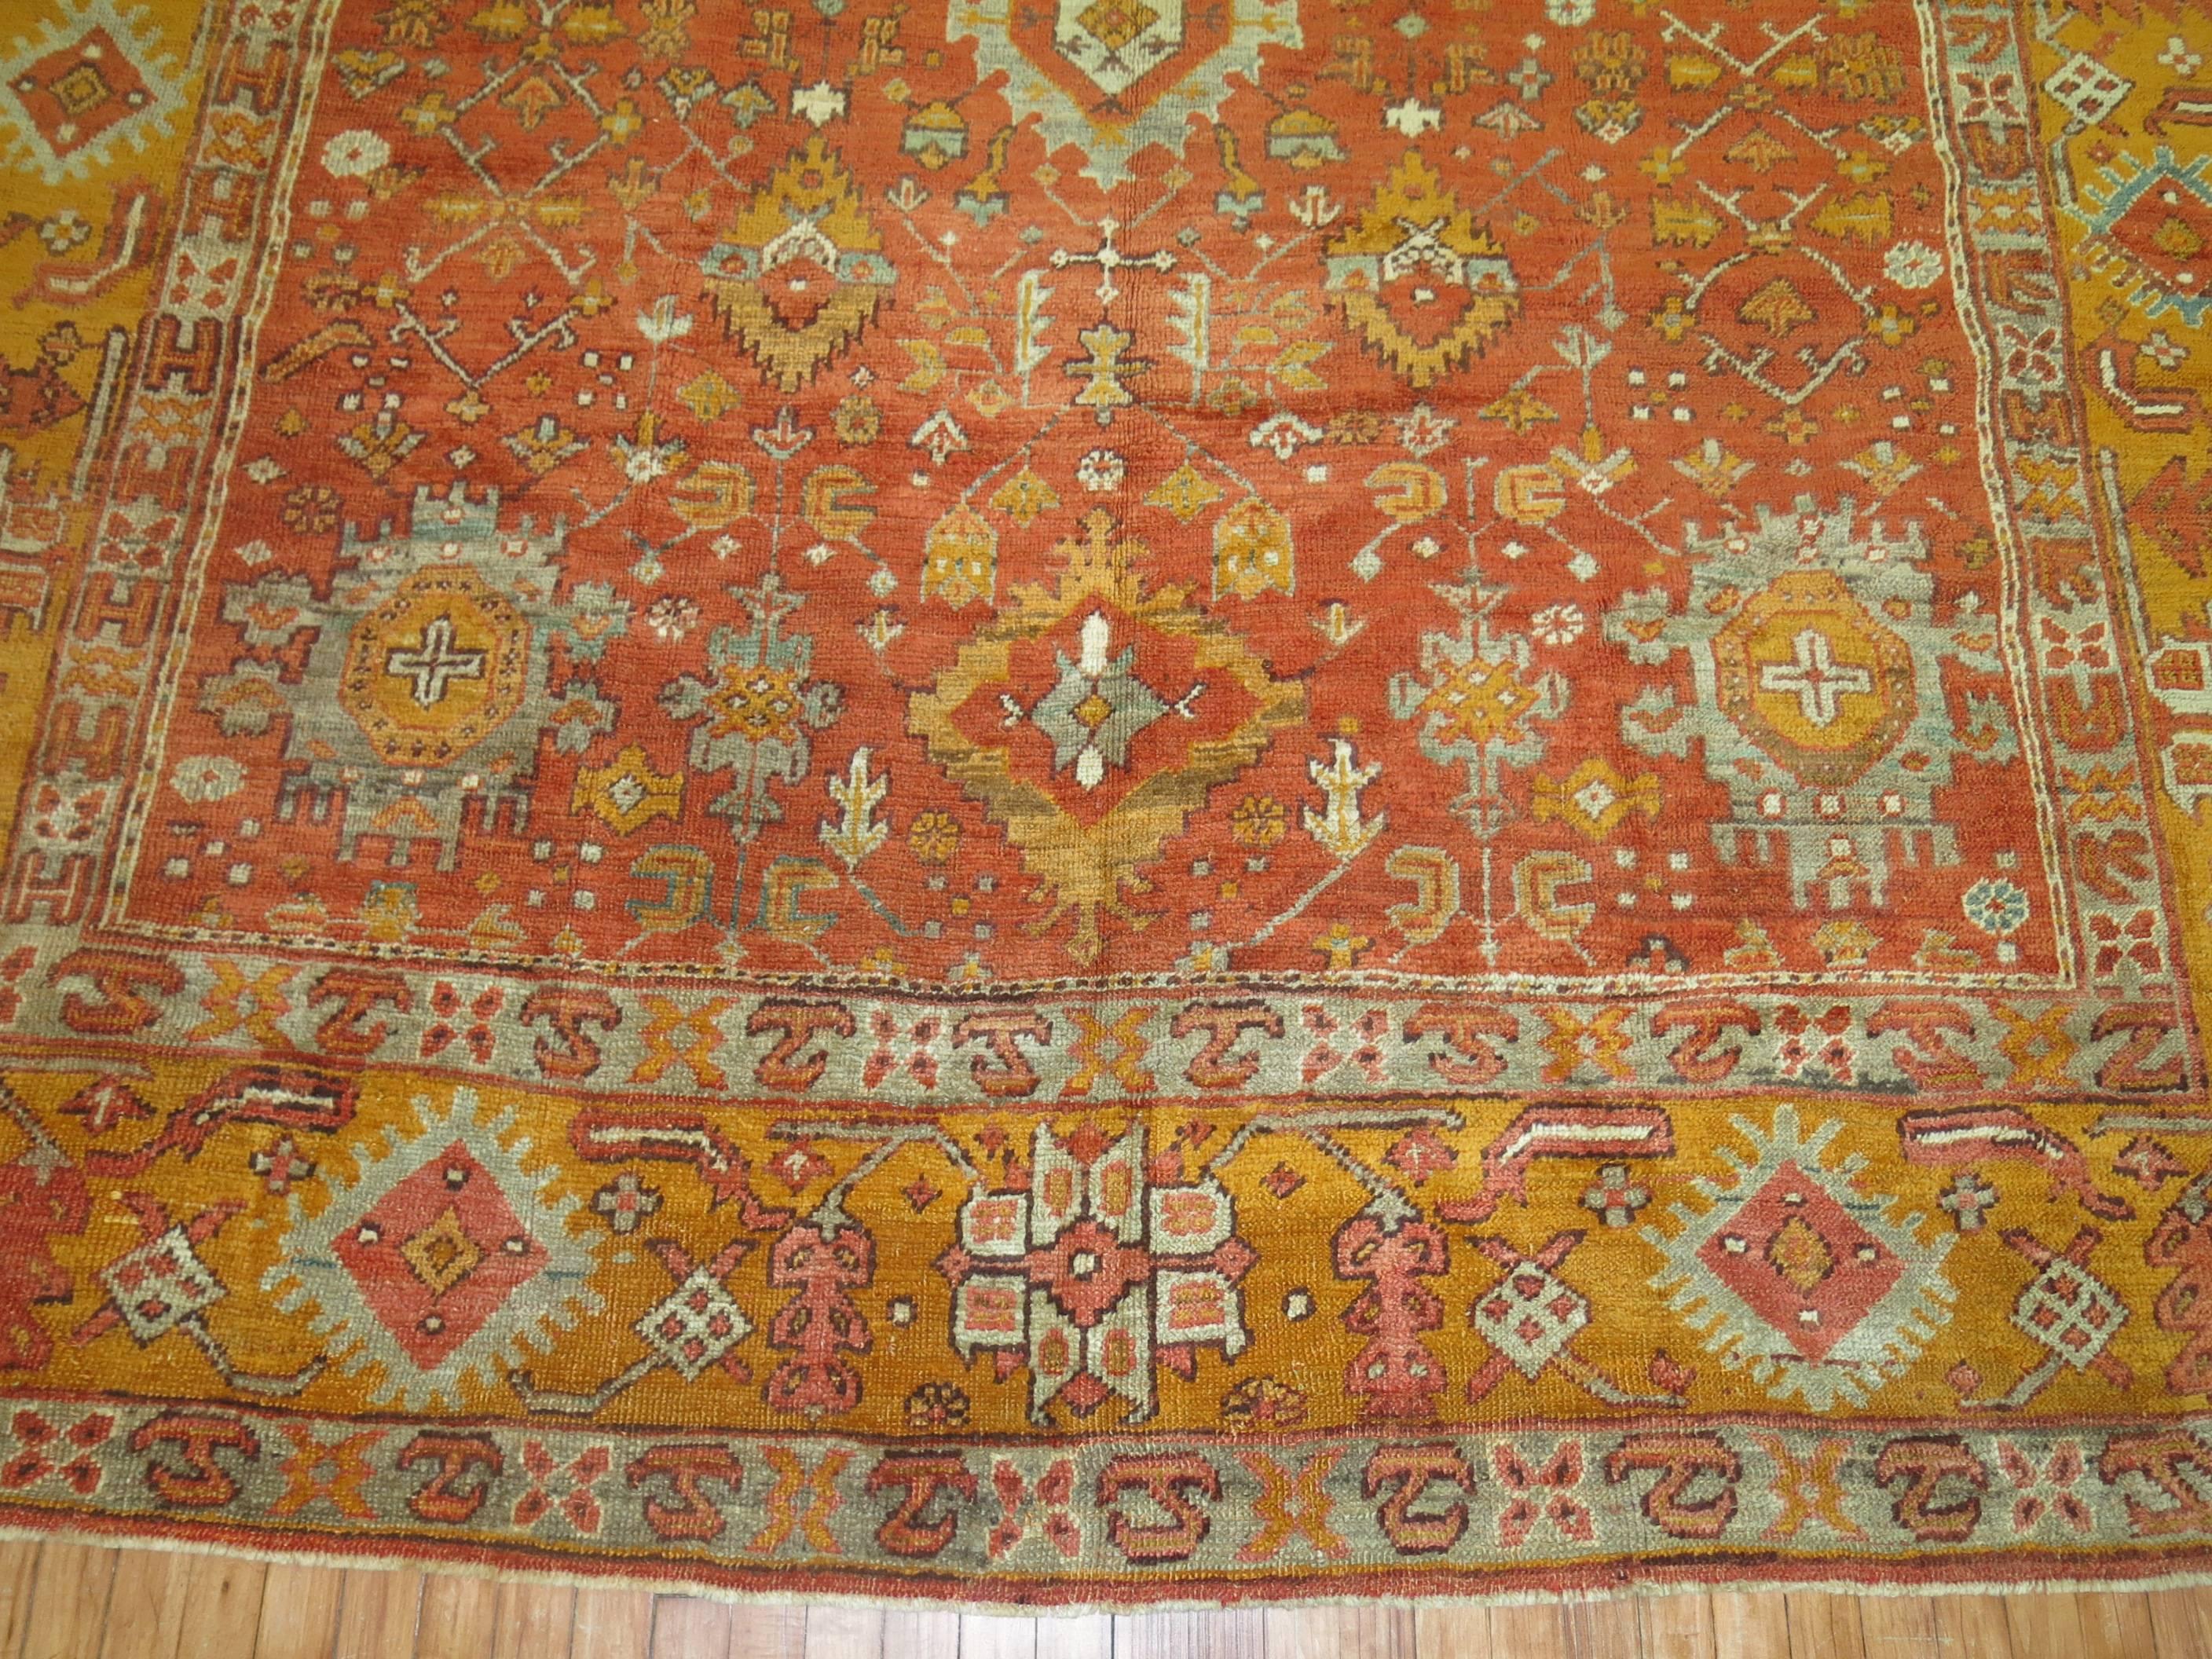 An exhilarating late 19th century antique Turkish Oushak rug in predominant orange accents. The finest quality of wool that you can find in any type of rug from this origin.